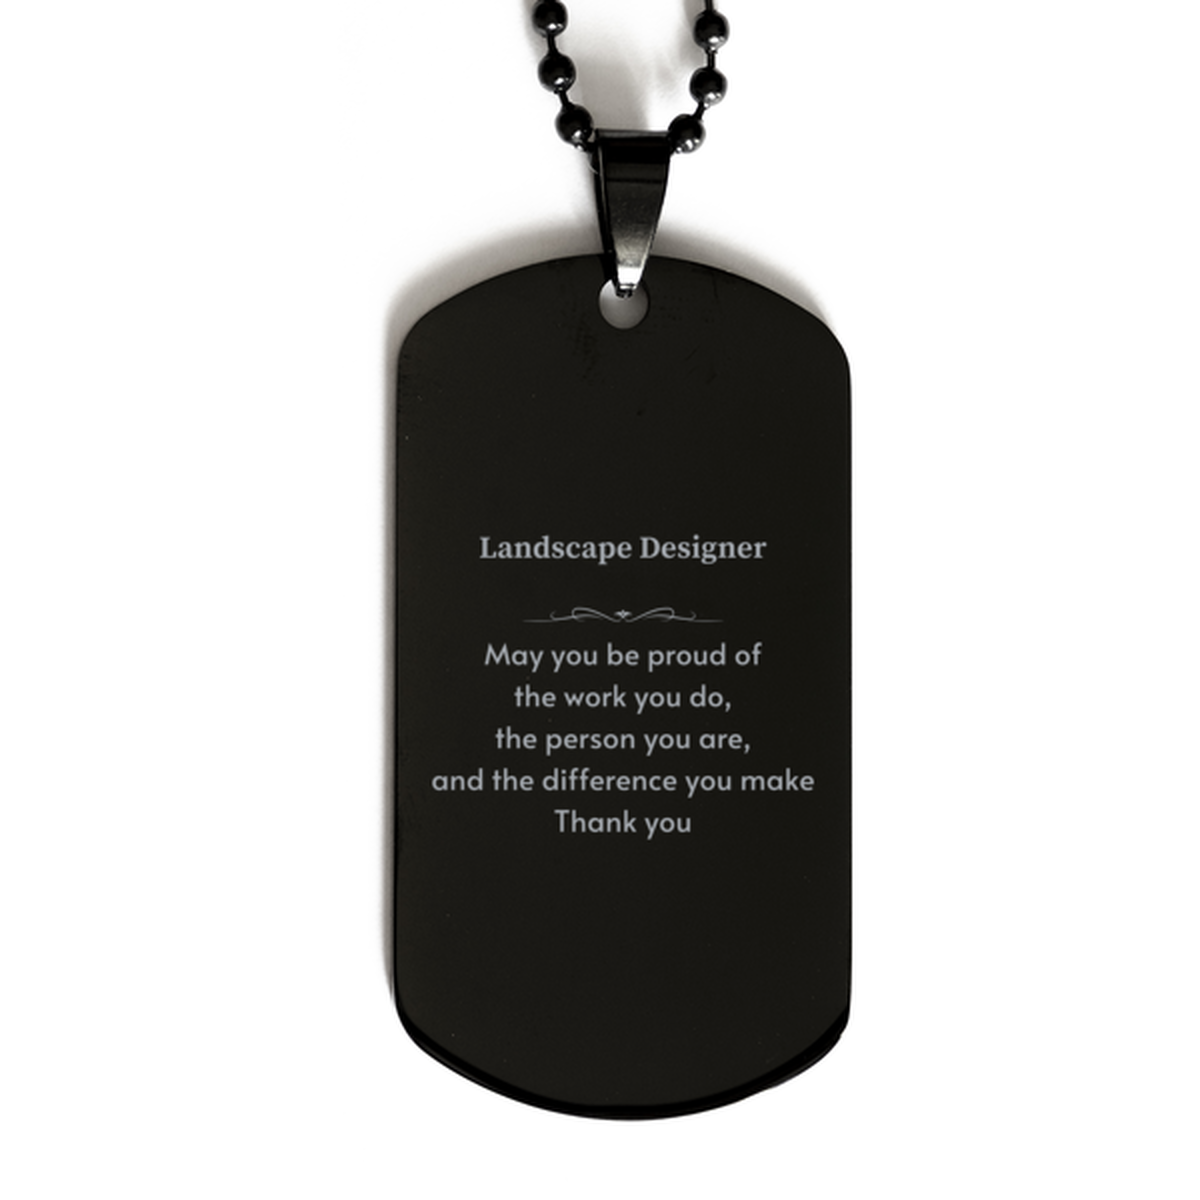 Heartwarming Black Dog Tag Retirement Coworkers Gifts for Landscape Designer, Landscape Designer May You be proud of the work you do, the person you are Gifts for Boss Men Women Friends